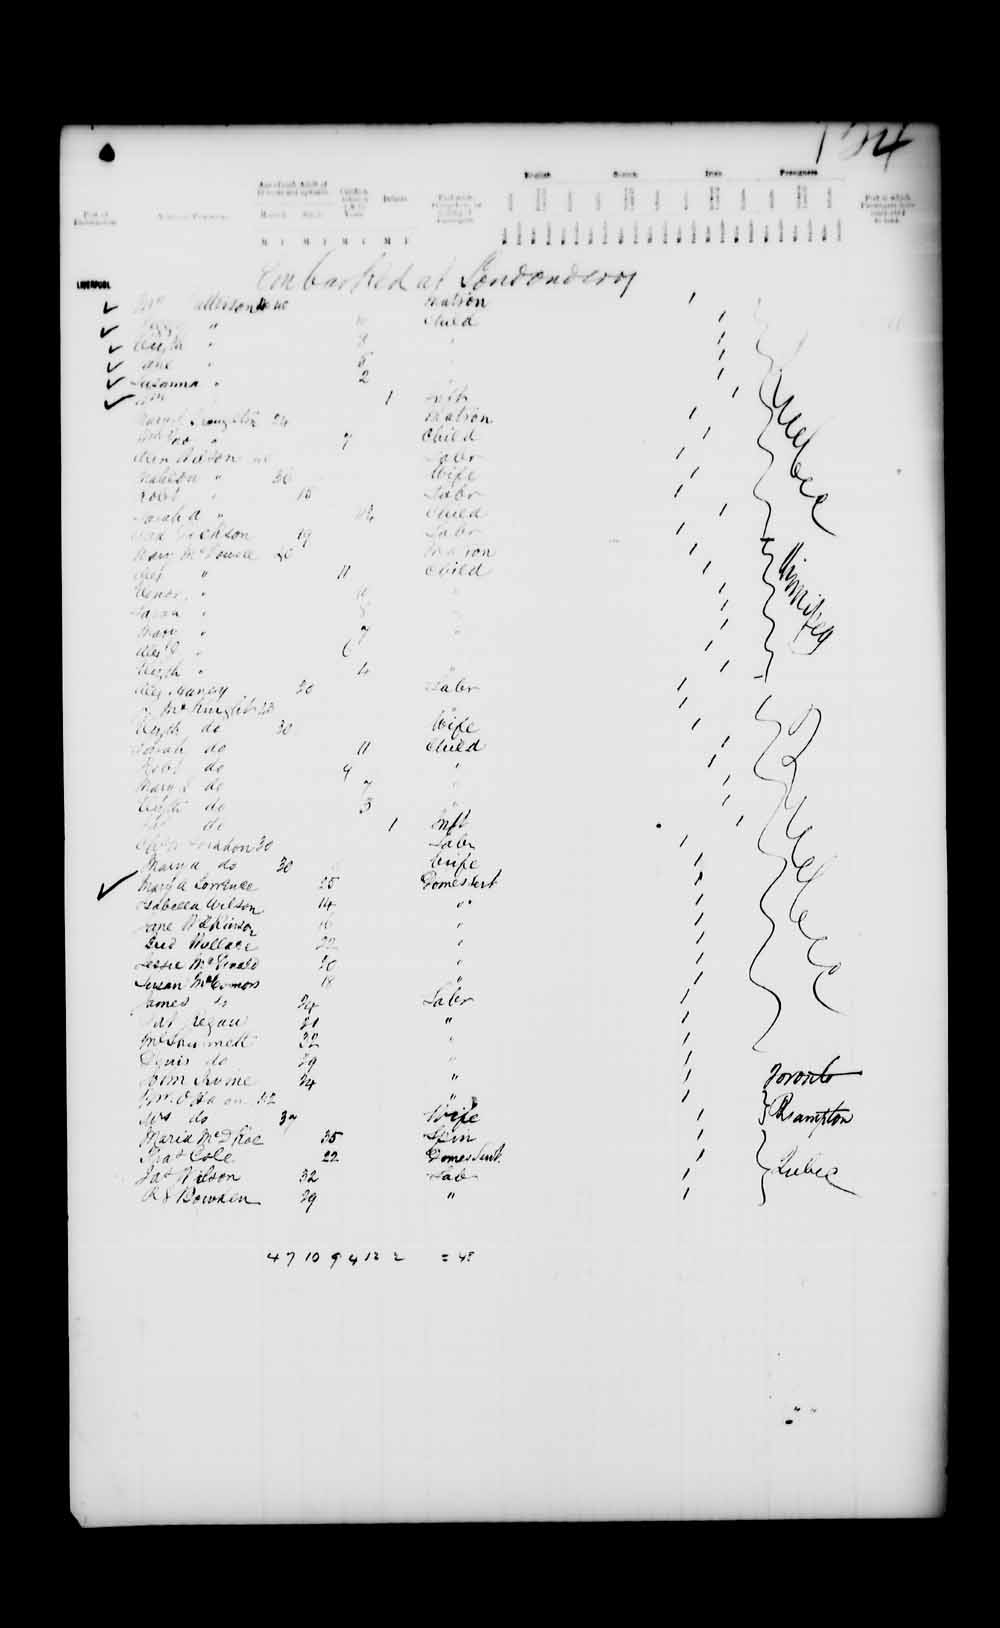 Digitized page of Passenger Lists for Image No.: e003541221